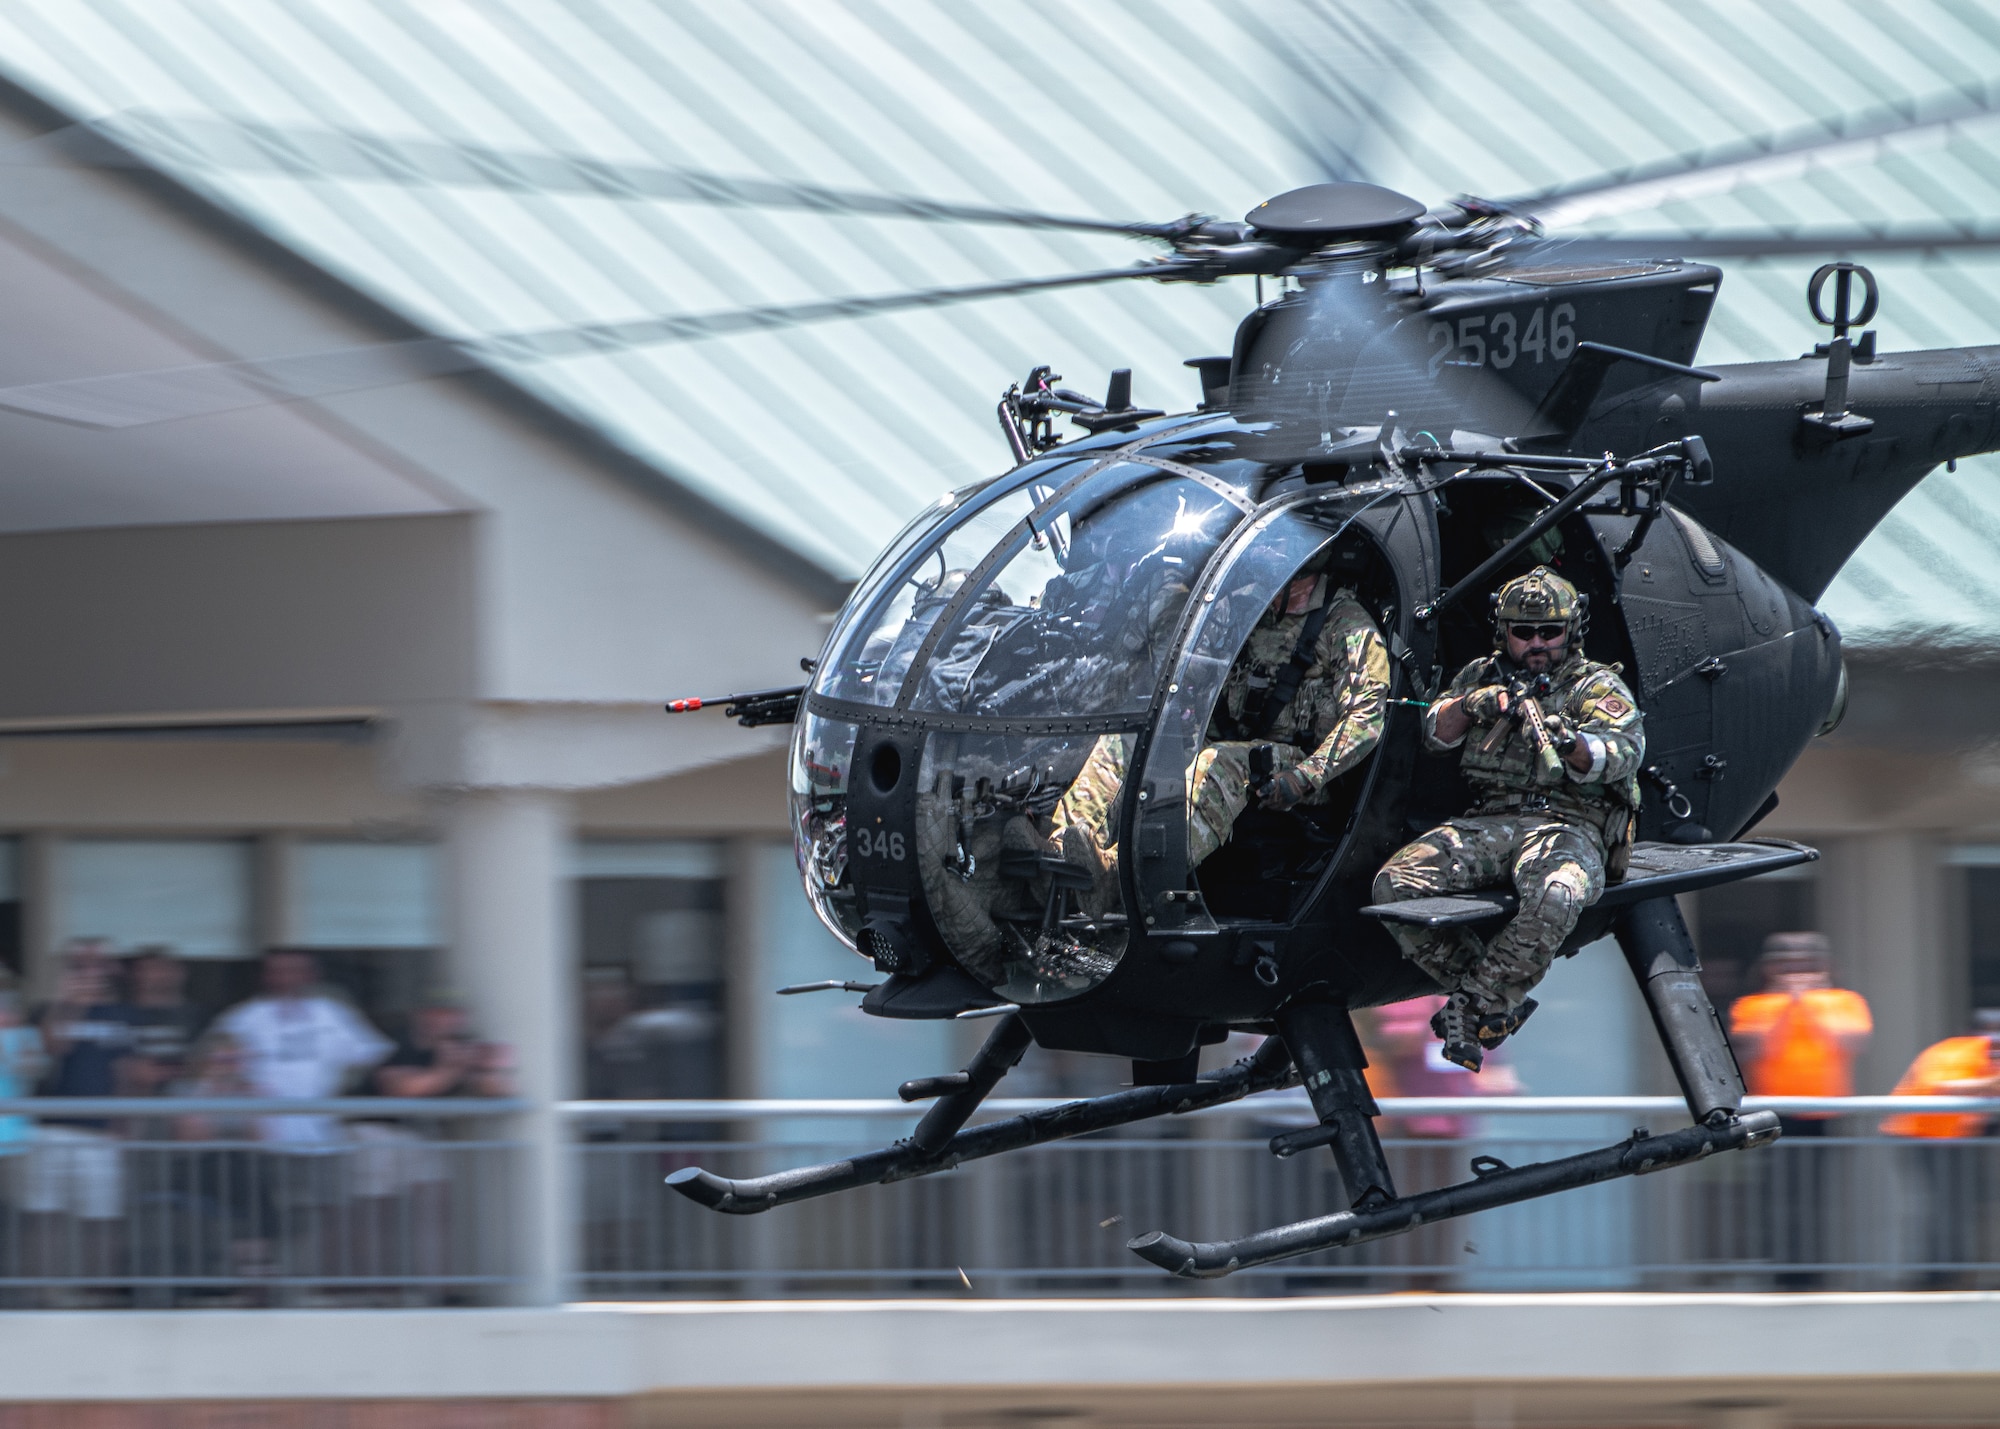 Members assigned to U.S. Special Operations Command fire blank rounds from a helicopter during a Special Operations Forces (SOF) demonstration in Downtown Tampa, Florida, May 18, 2022.